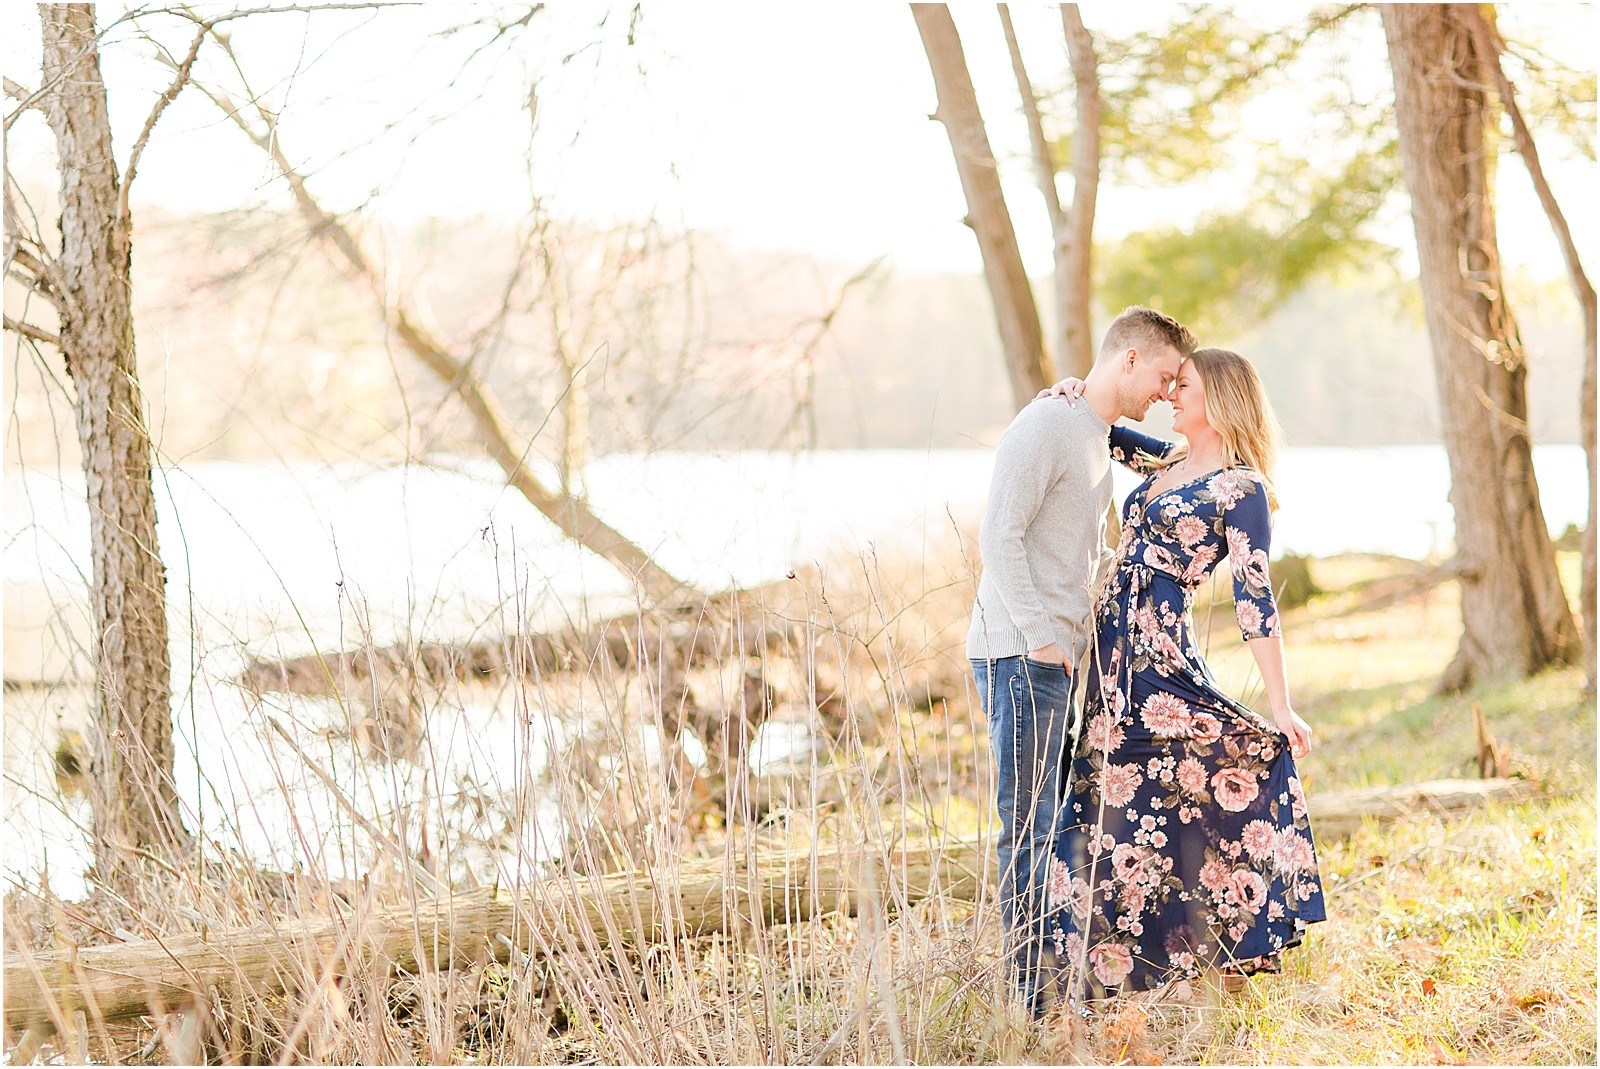 Rachel and Nick | Lincoln State Park Engagement Session 007.jpg